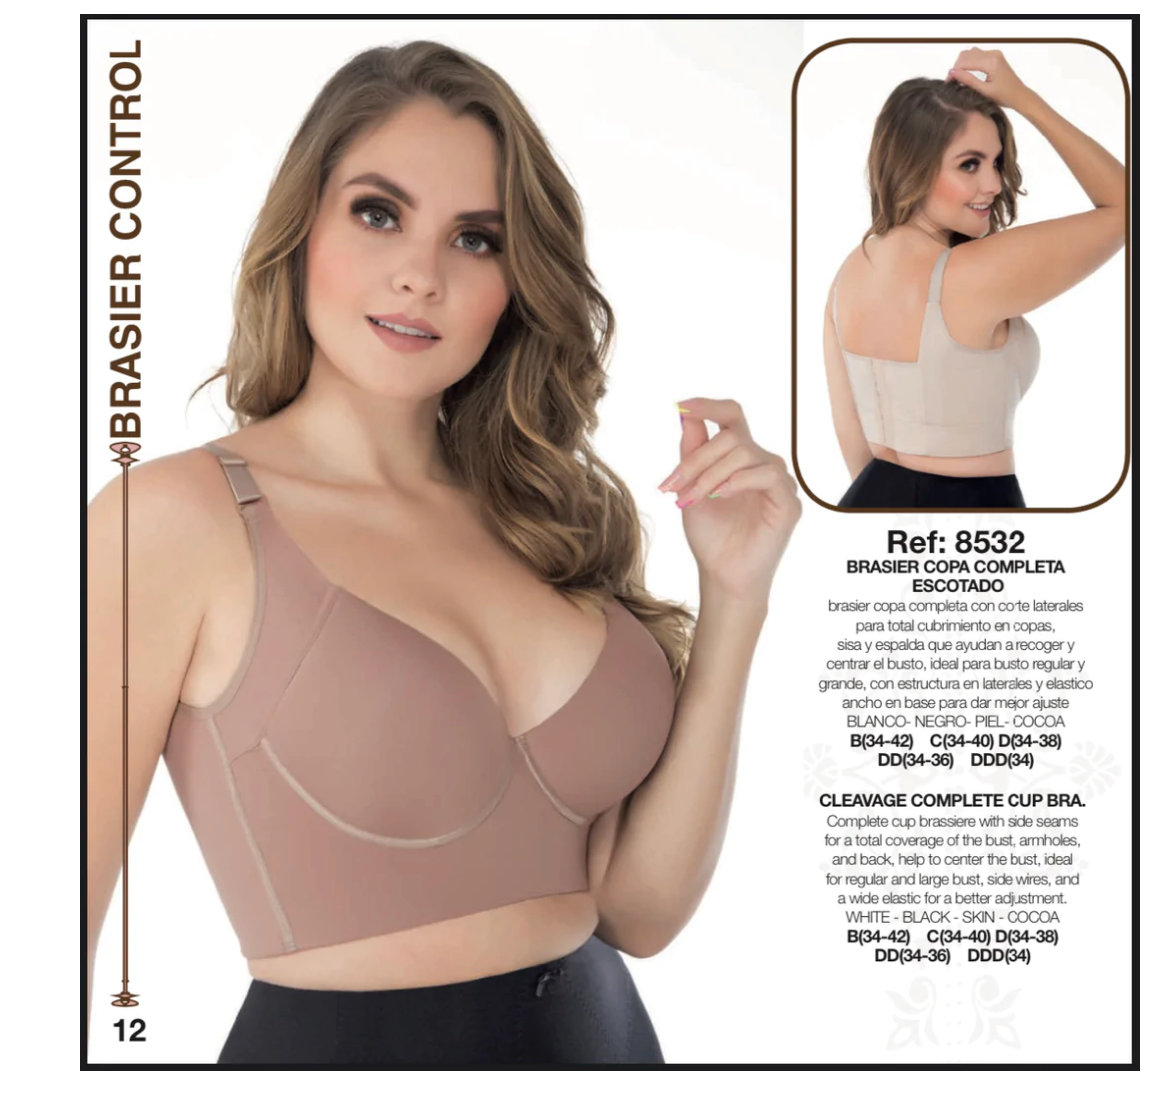 8532 o 8542 UP LADY  Brassier 🇨🇴 push up extra firm, high compression, back bulge control, with 3 rows of hooks.